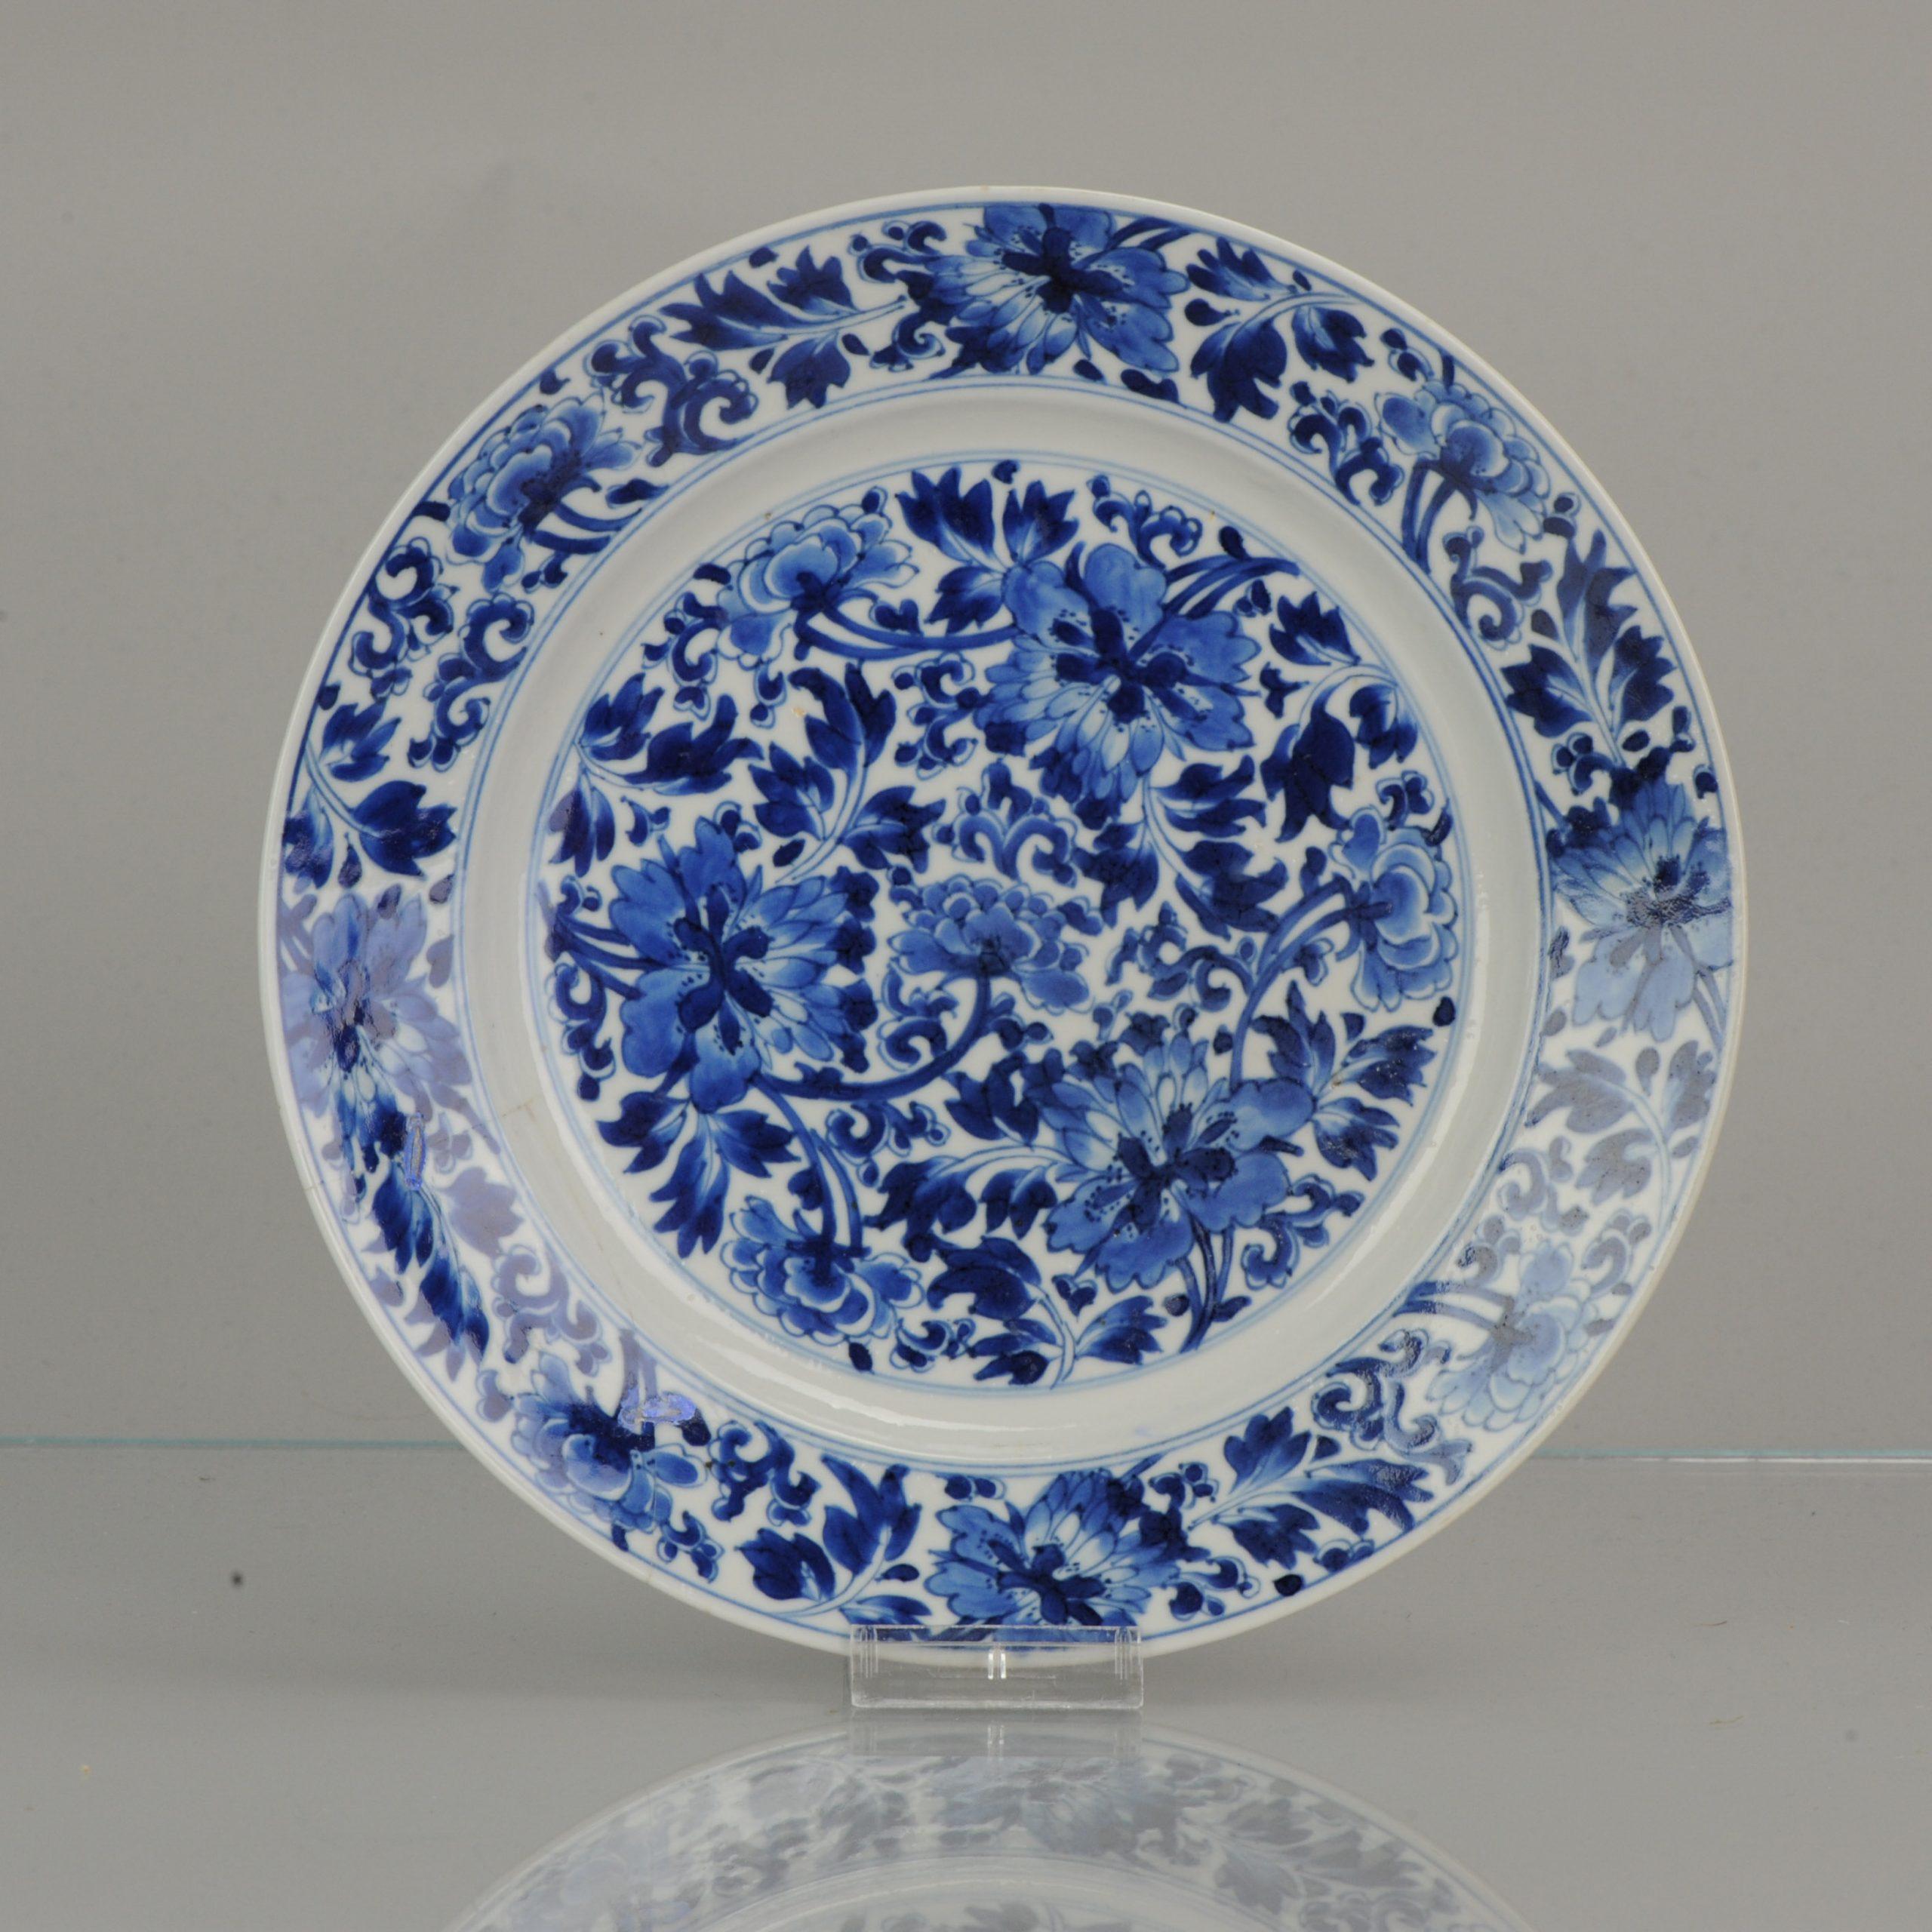 Rare. Very nice piece, beautiful colors. Bottom marked with Kangxi mark

Condition:
Restored part to rim, with crams. 1 line extra. 1 frit to base rim. Size 209 x 29mm
Period:
18th century Qing (1661-1912).